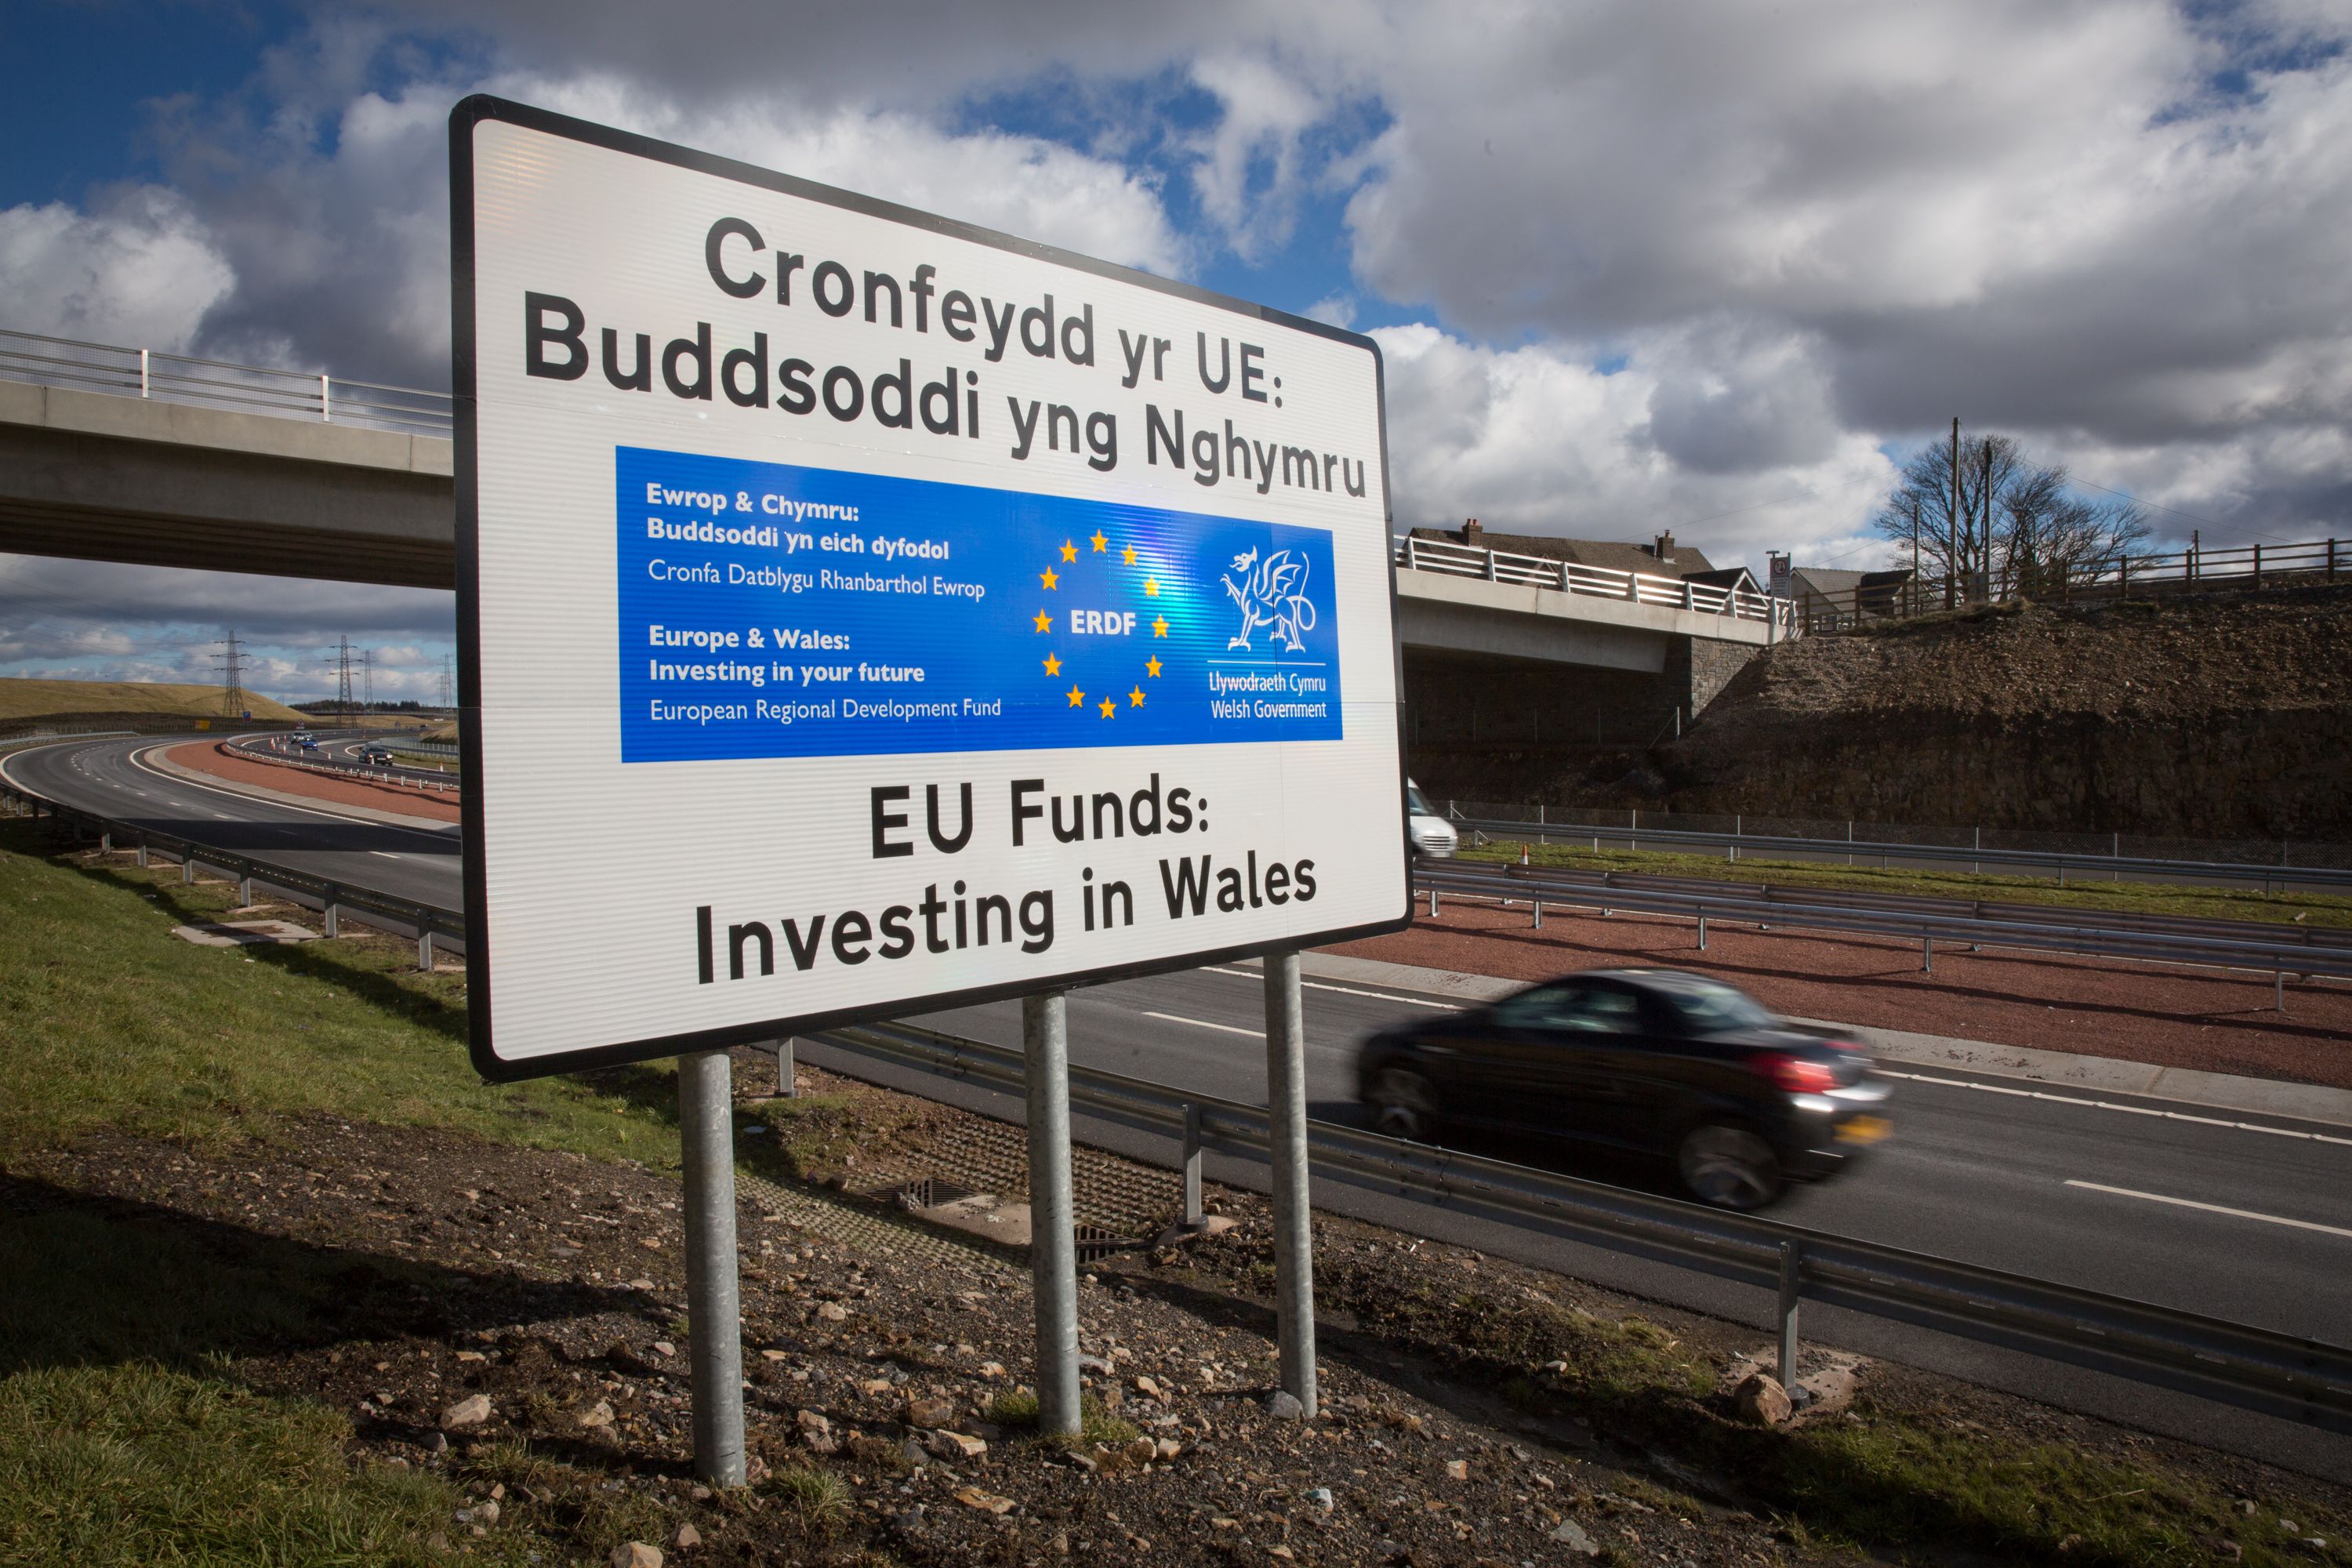 EBBW VALE, UNITED KINGDOM - MARCH 07: A car passes a EU funding sign on the newly opened A465 near Ebbw Vale on March 7, 2016 in Blaenau Gwent, Wales. The West Wales and the Valleys region, which covers 15 local authority areas, has been identified as the poorest region in the whole of north Western Europe, with large swathes of Wales poorer than parts of Bulgaria, Romania and Poland and four-and-a-half times less prosperous than central London, highlighting the fact that the UK now has Europe's highest inequality of wealth within the European Union. To address this, from 2014 to 2020, Wales will benefit from around £1.8bn EU European Structural Funds investment which comprises funding from two separate European Structural Funds: the European Regional Development Fund (ERDF) and the European Social Fund (ESF). The ERDF funds are used for a range of things including urban development, research and innovation, competitiveness, use of renewable energy and energy efficiency, connectivity and urban development. The ESF funds are to be directed to tackling poverty through more sustainable employment, increasing skills and tackling youth unemployment in the region. (Photo by Matt Cardy/Getty Images)